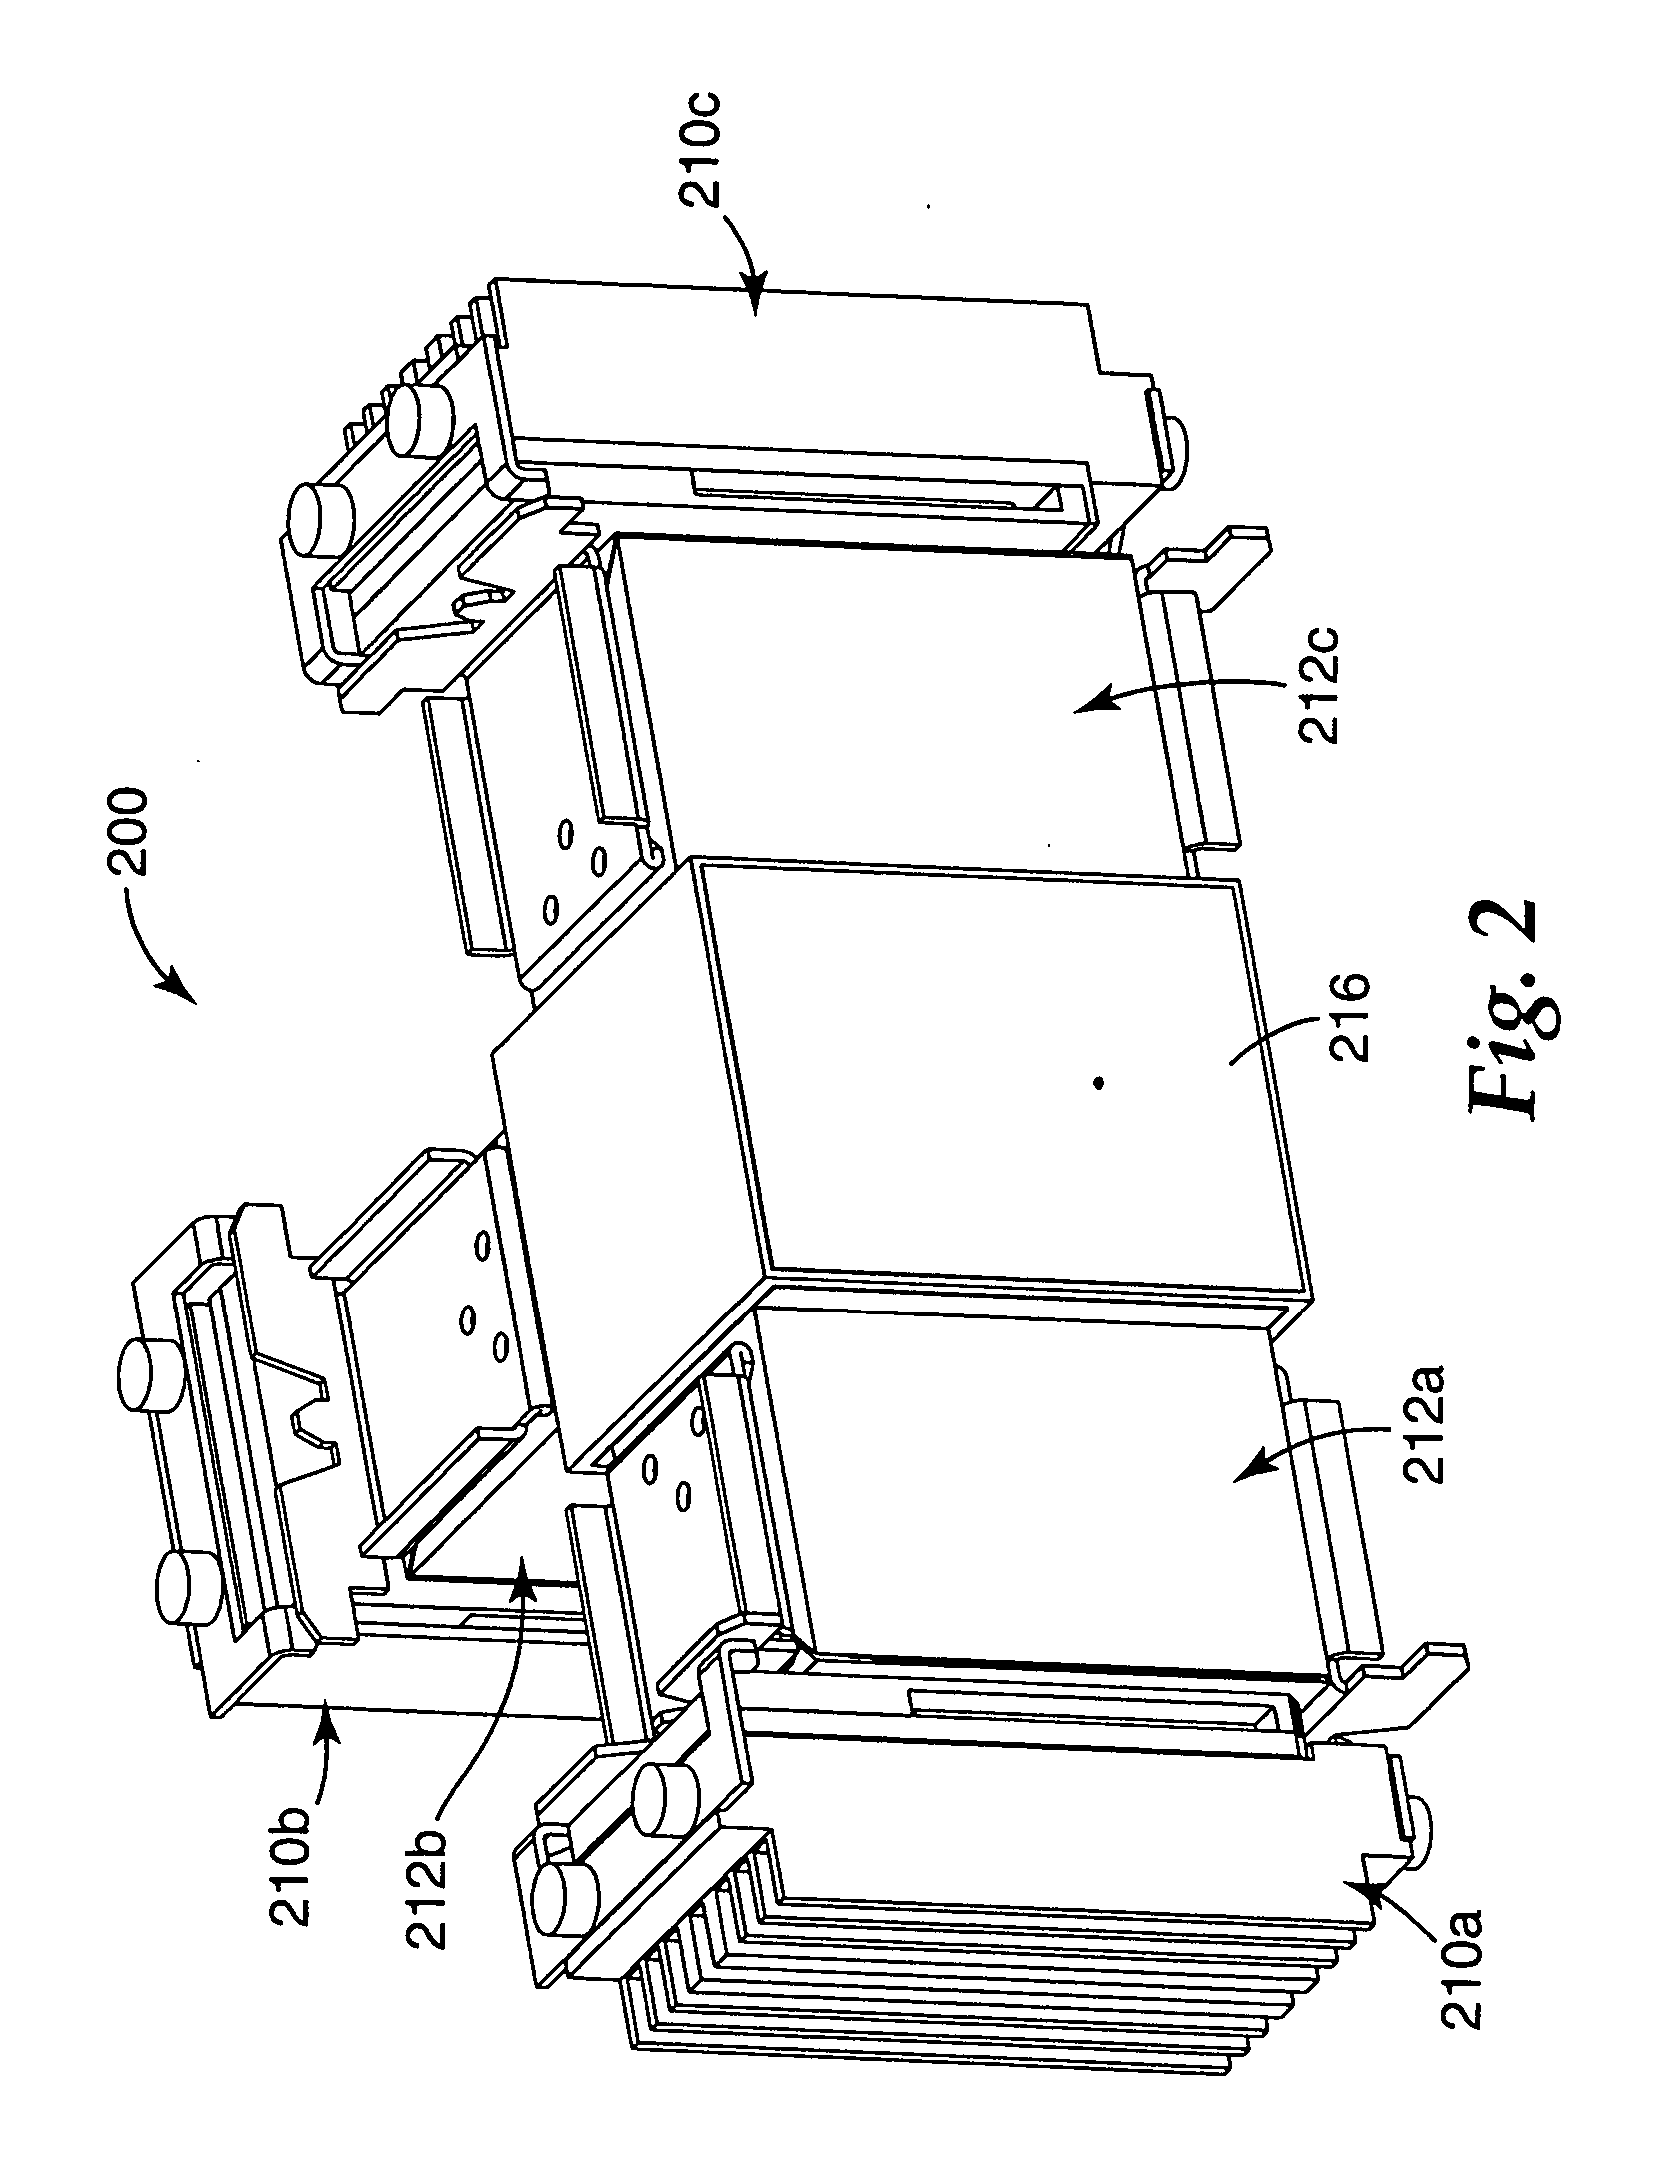 Apparatus and method for mounting imagers on stress-sensitive polarizing beam splitters